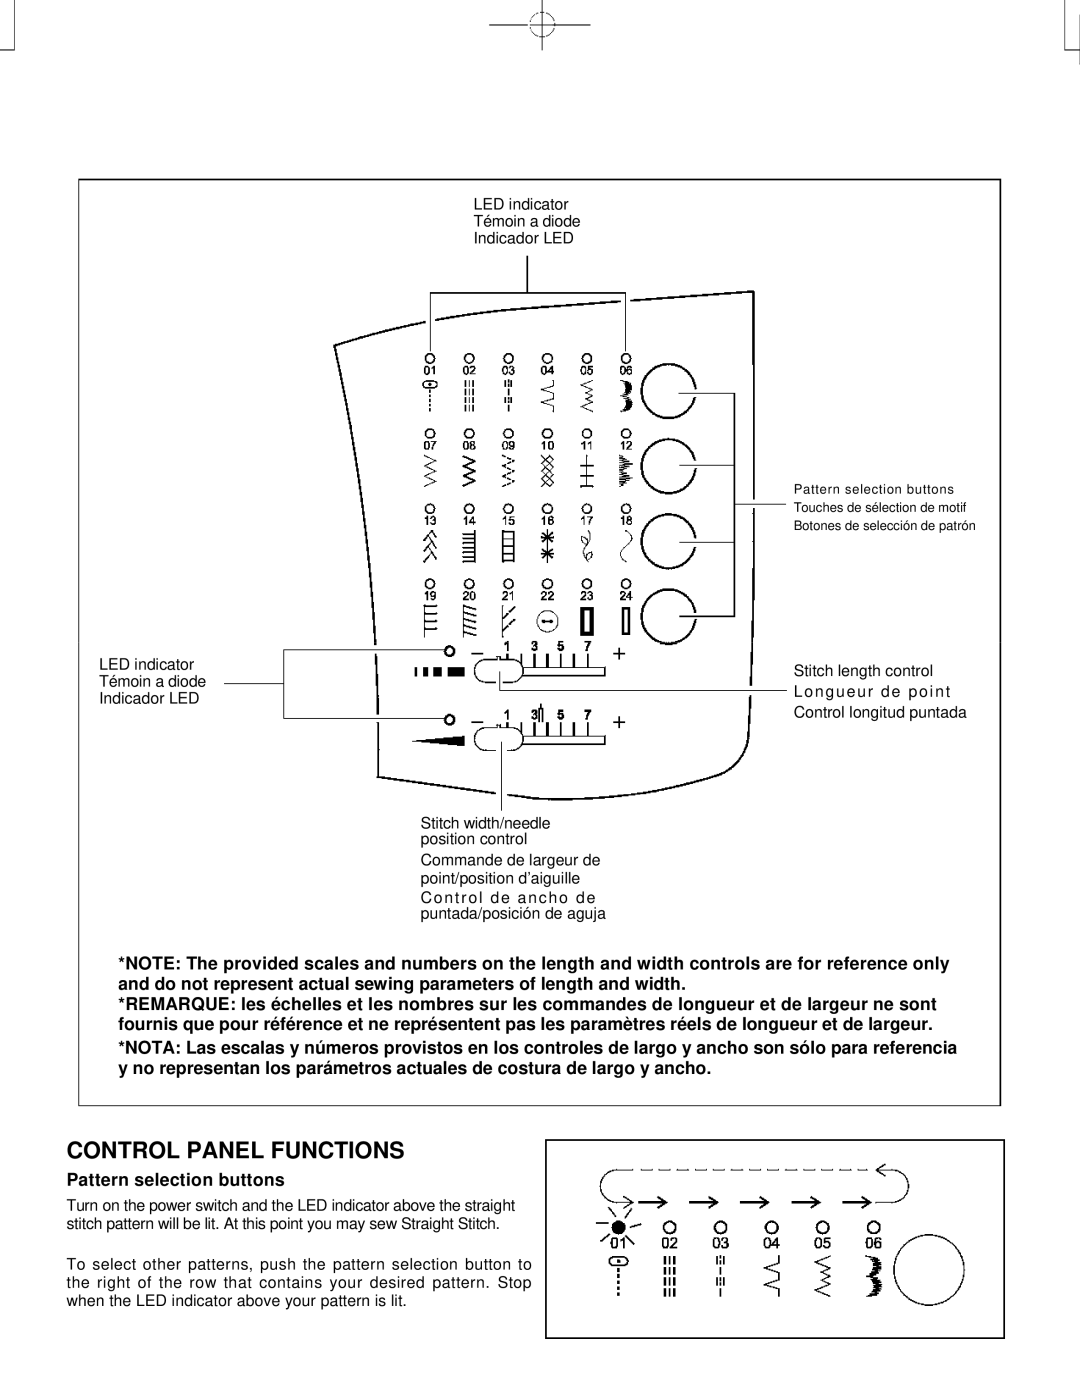 Singer CE-150 instruction manual Control Panel Functions, Pattern selection buttons 